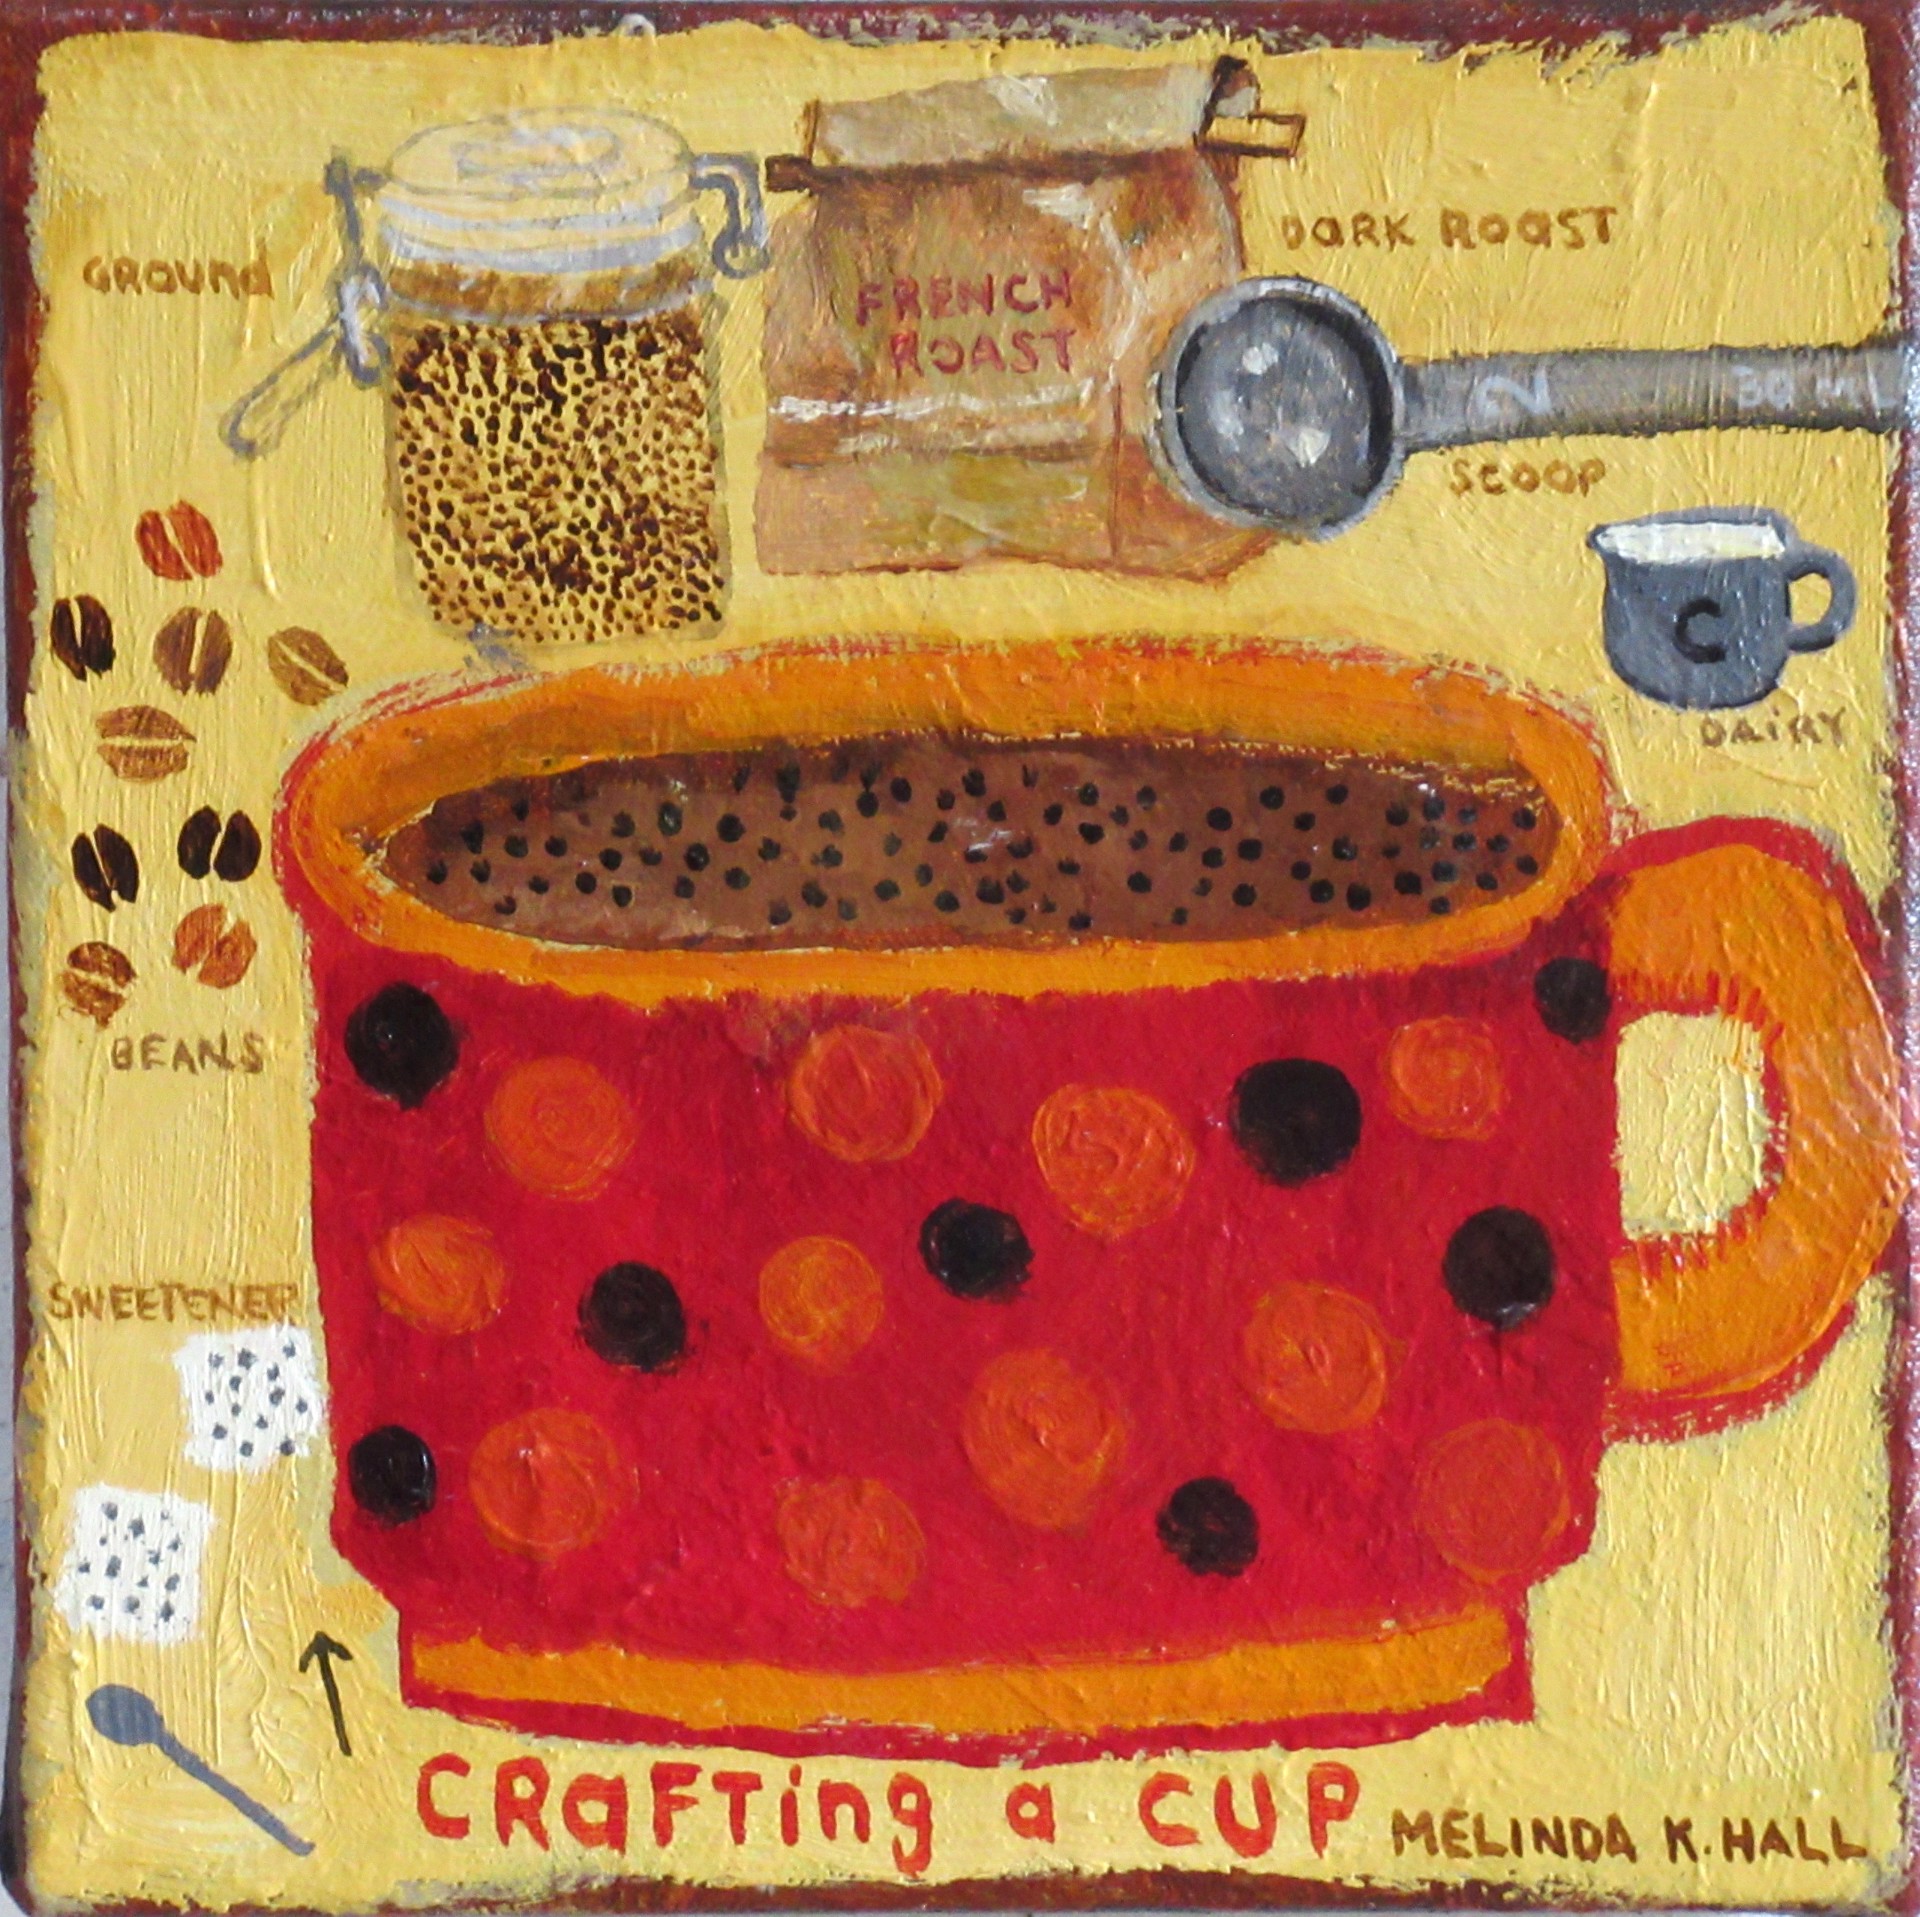 Crafting a Cup by Melinda K. Hall